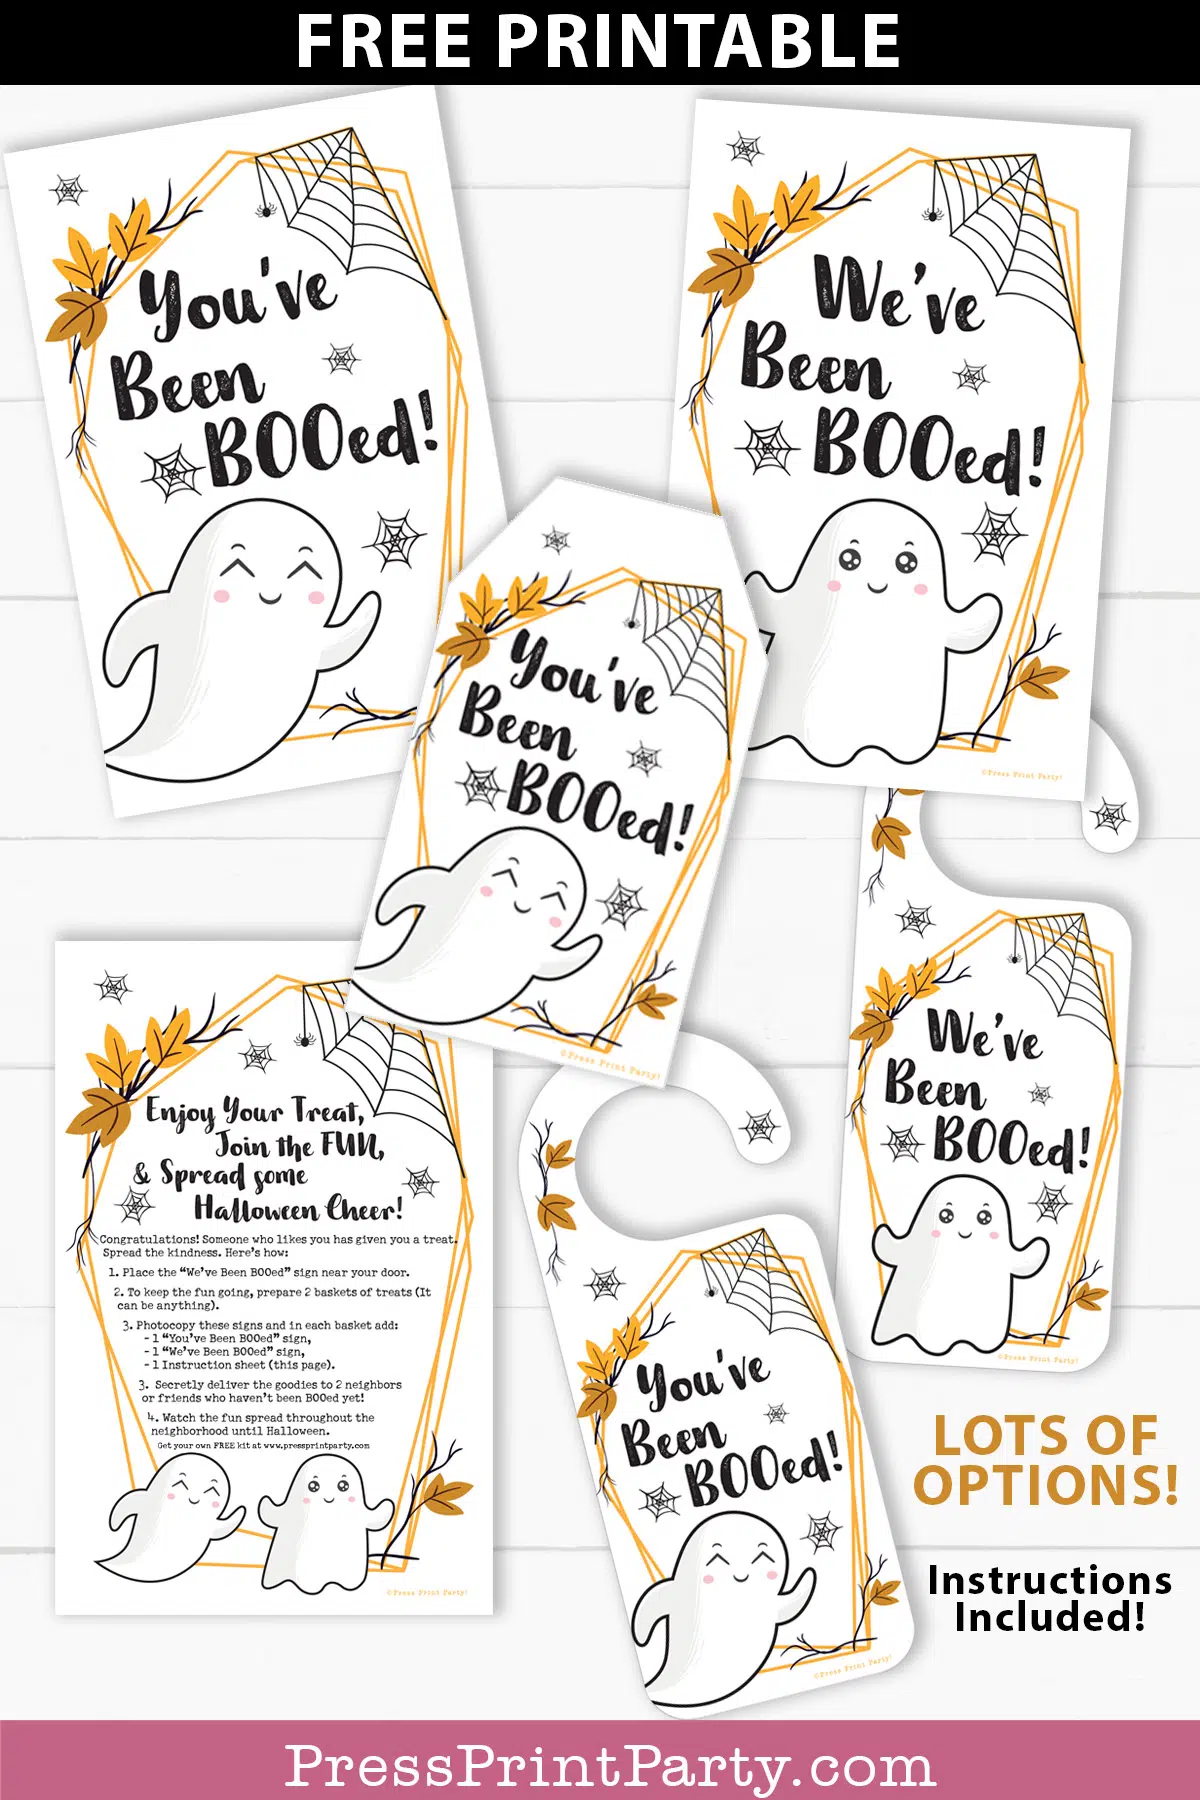 You've been booed sign and We've been booed sign halloween game with instructions Press Print Party!